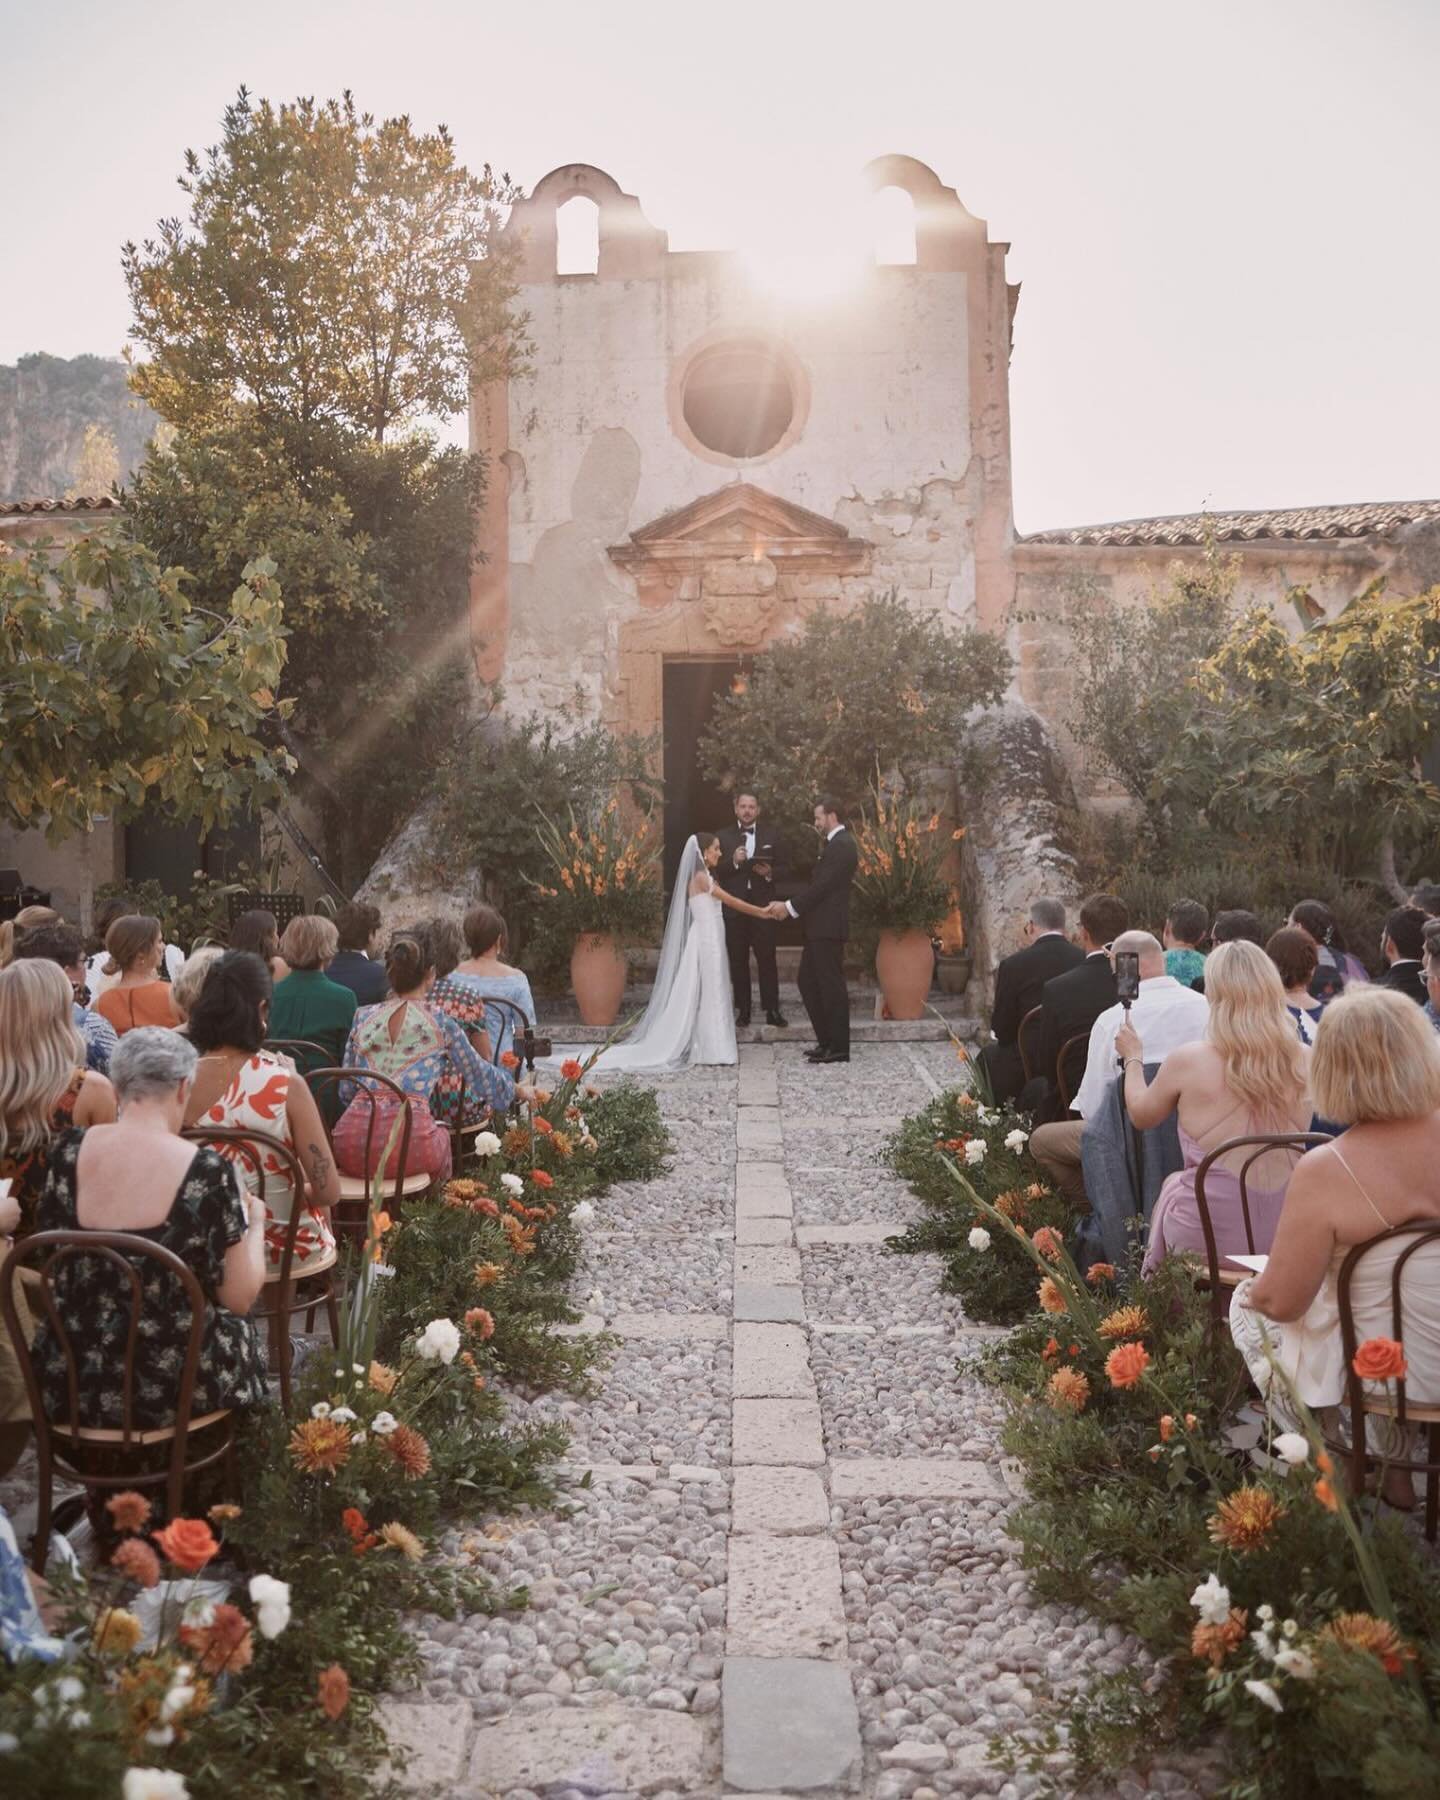 One hazy Sicilian summer evening last August, Hannah &amp; Andy lived out their long awaited wedding dreams @tonnaradiscopello 

Counting down the days till September and we&rsquo;re back again!

@benjaminwheeler 
@alfioflowers 

#italianwedding #lat